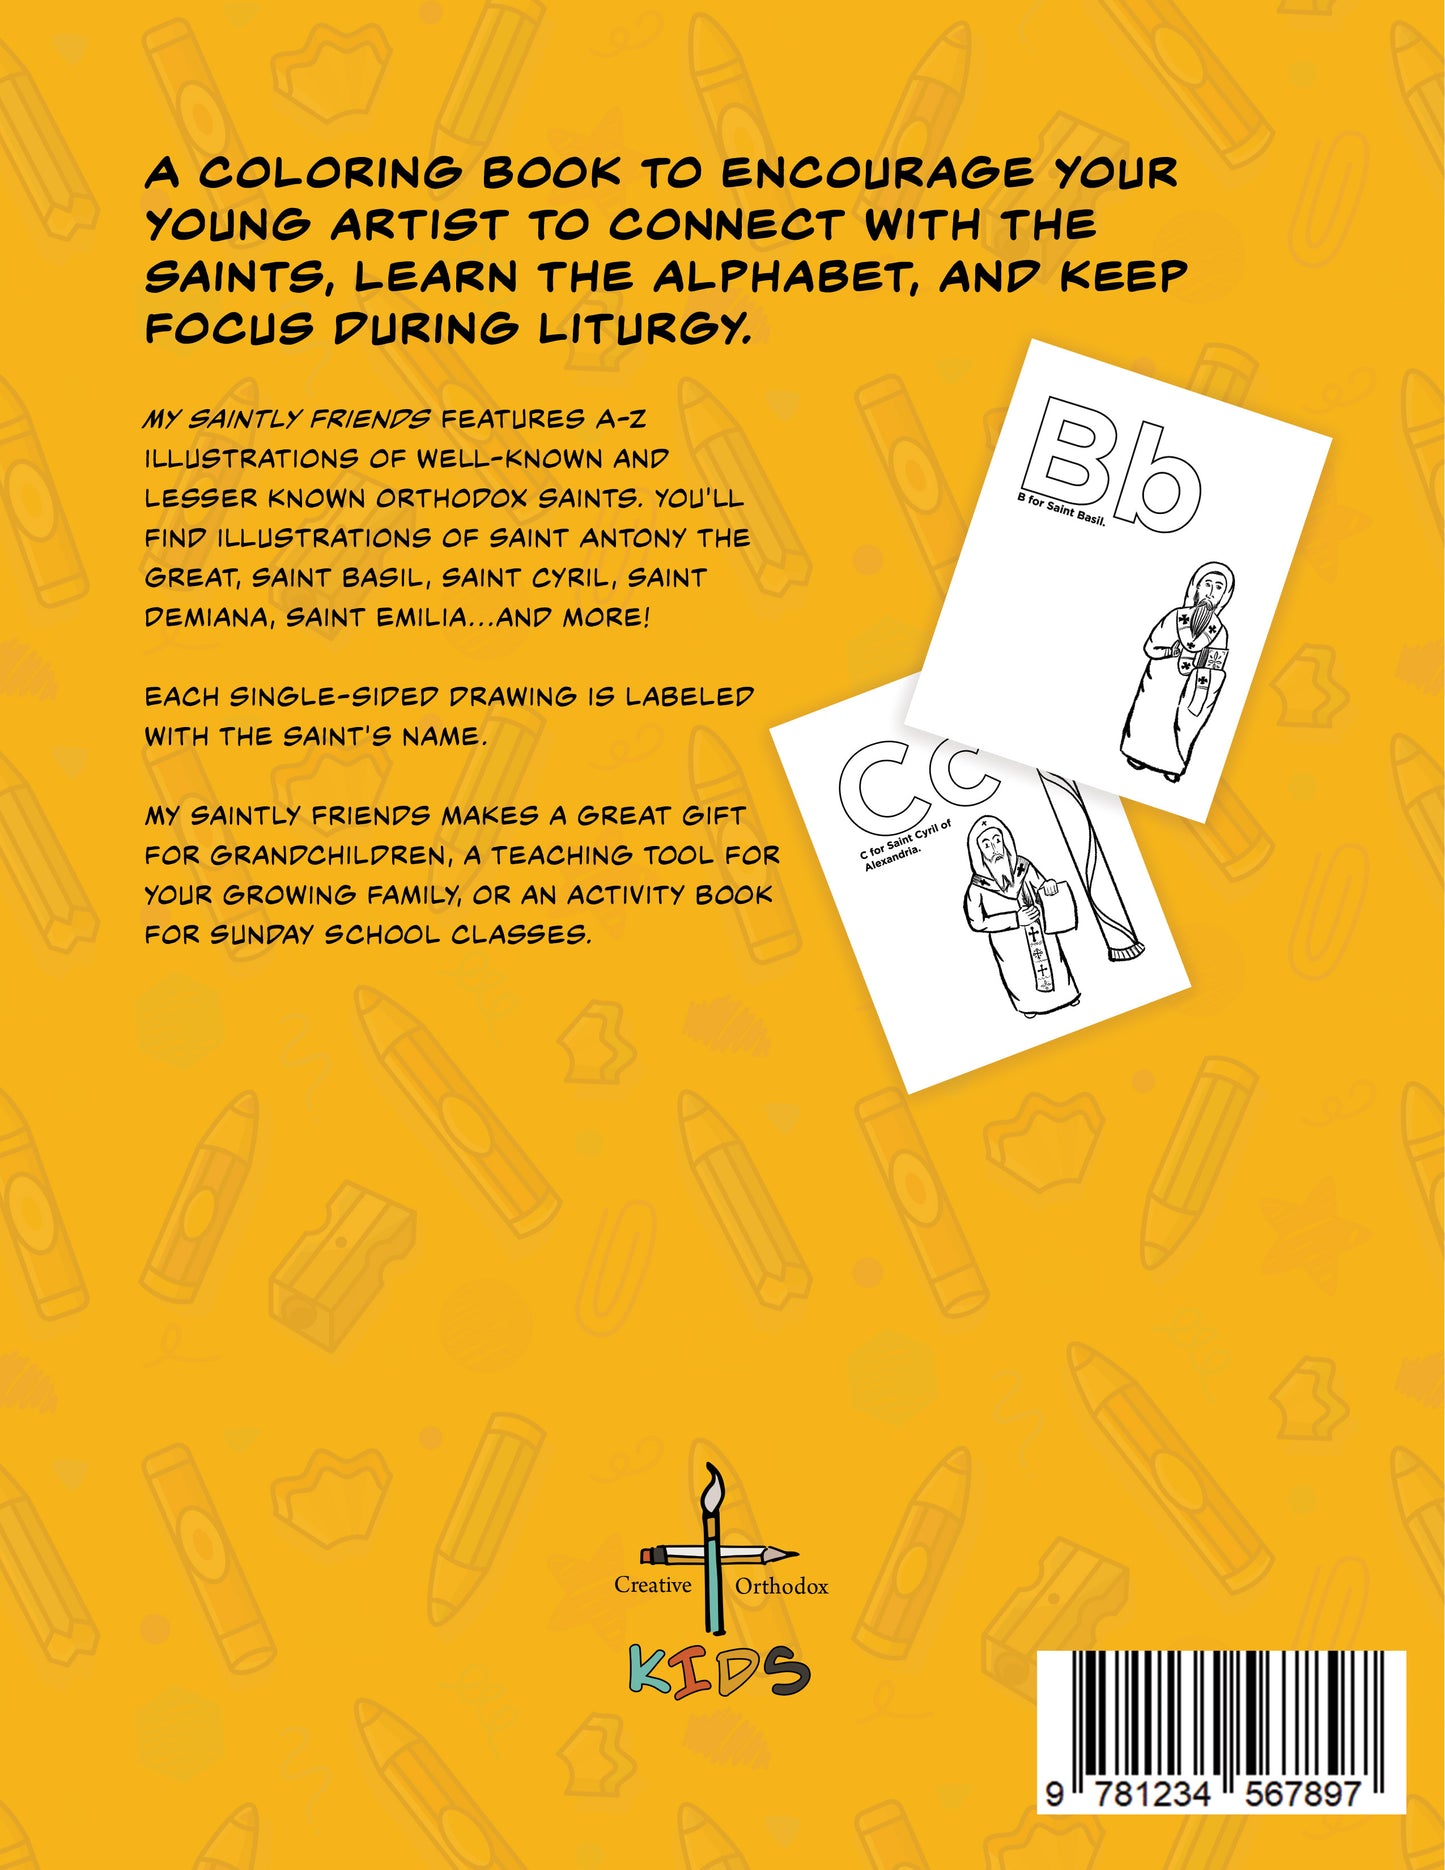 My Saintly Alphabet: A Creative Orthodox Coloring Book for Kids